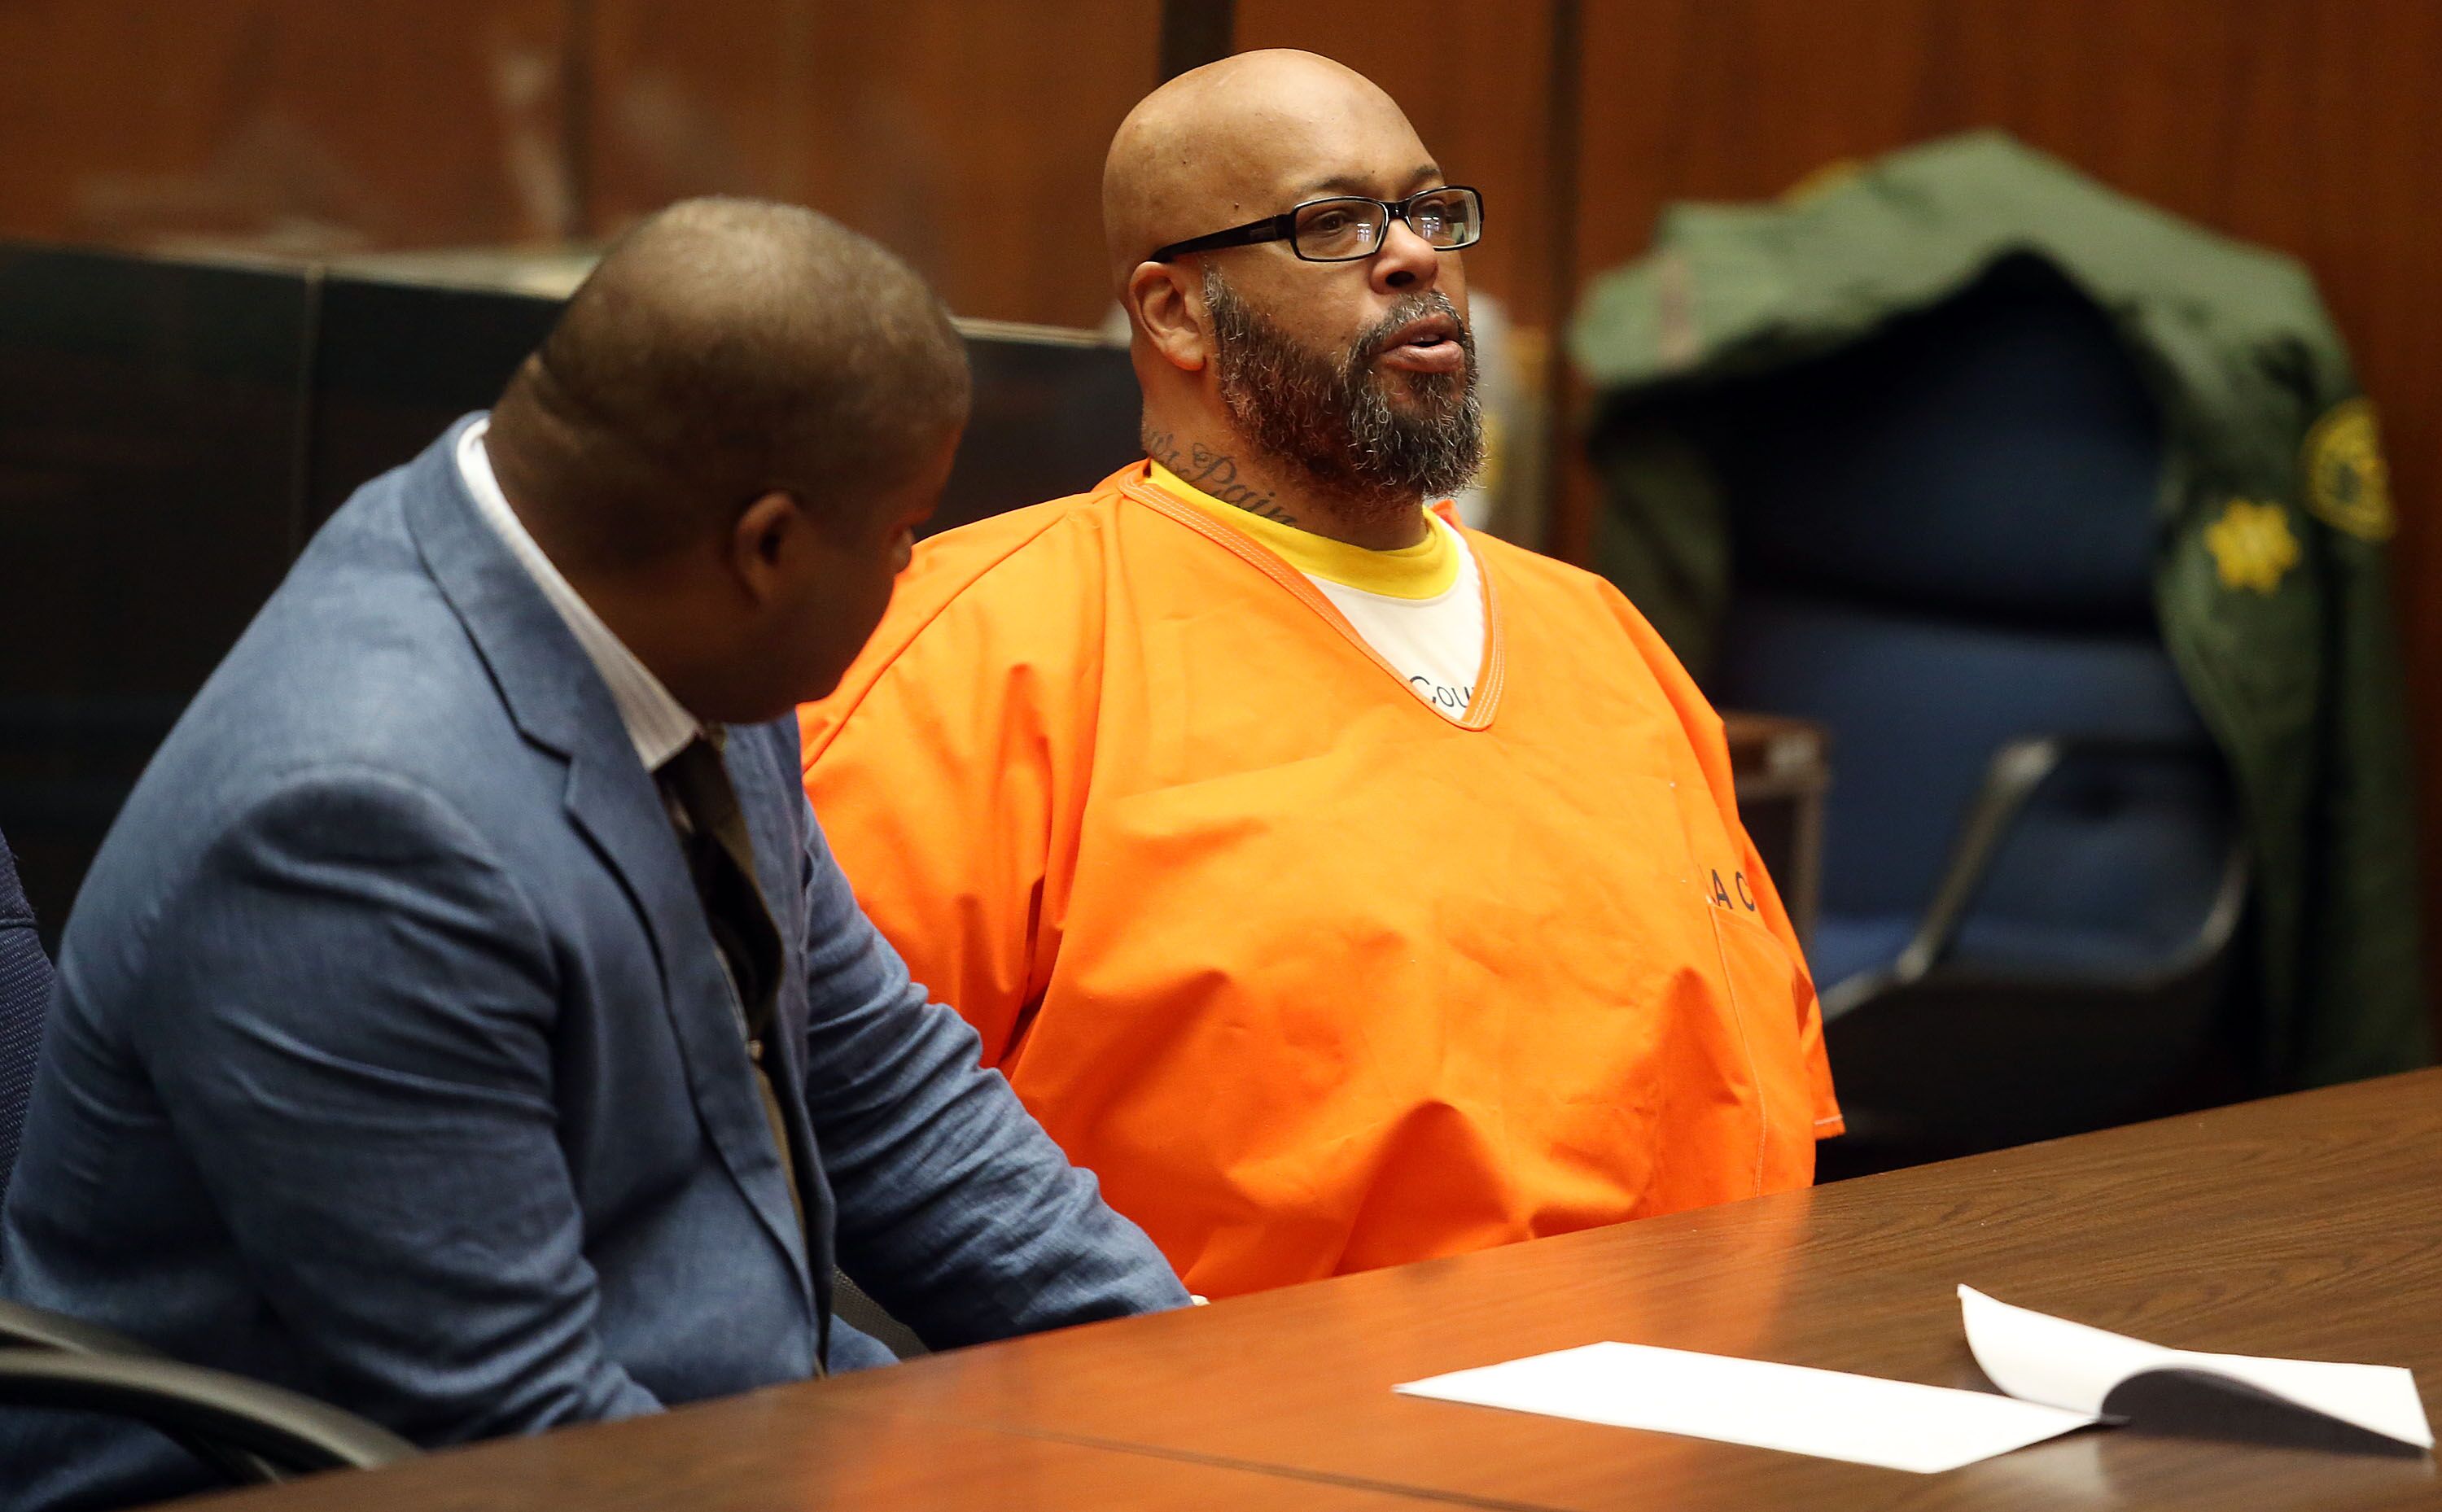 Marion "Suge" Knight (R) and his attorney Thaddeus Culpepper appear in court for a pretrial hearing at the Clara Shortridge Foltz Criminal Justice Center on February 26, 2016 in Los Angeles, California. | Source: Getty Images